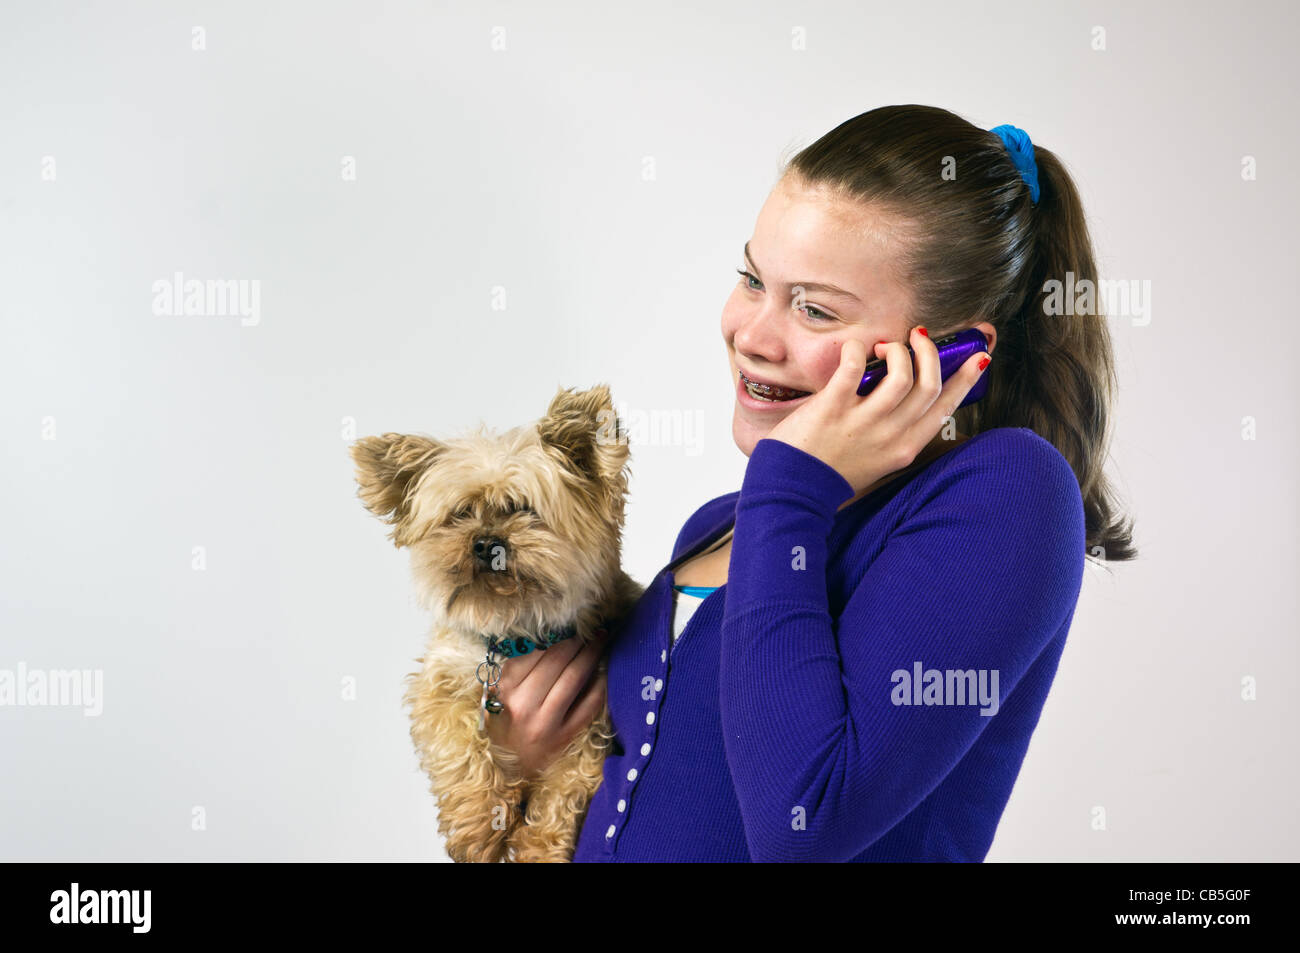 Teen girl talking on the telephone and holding a small dog Stock Photo